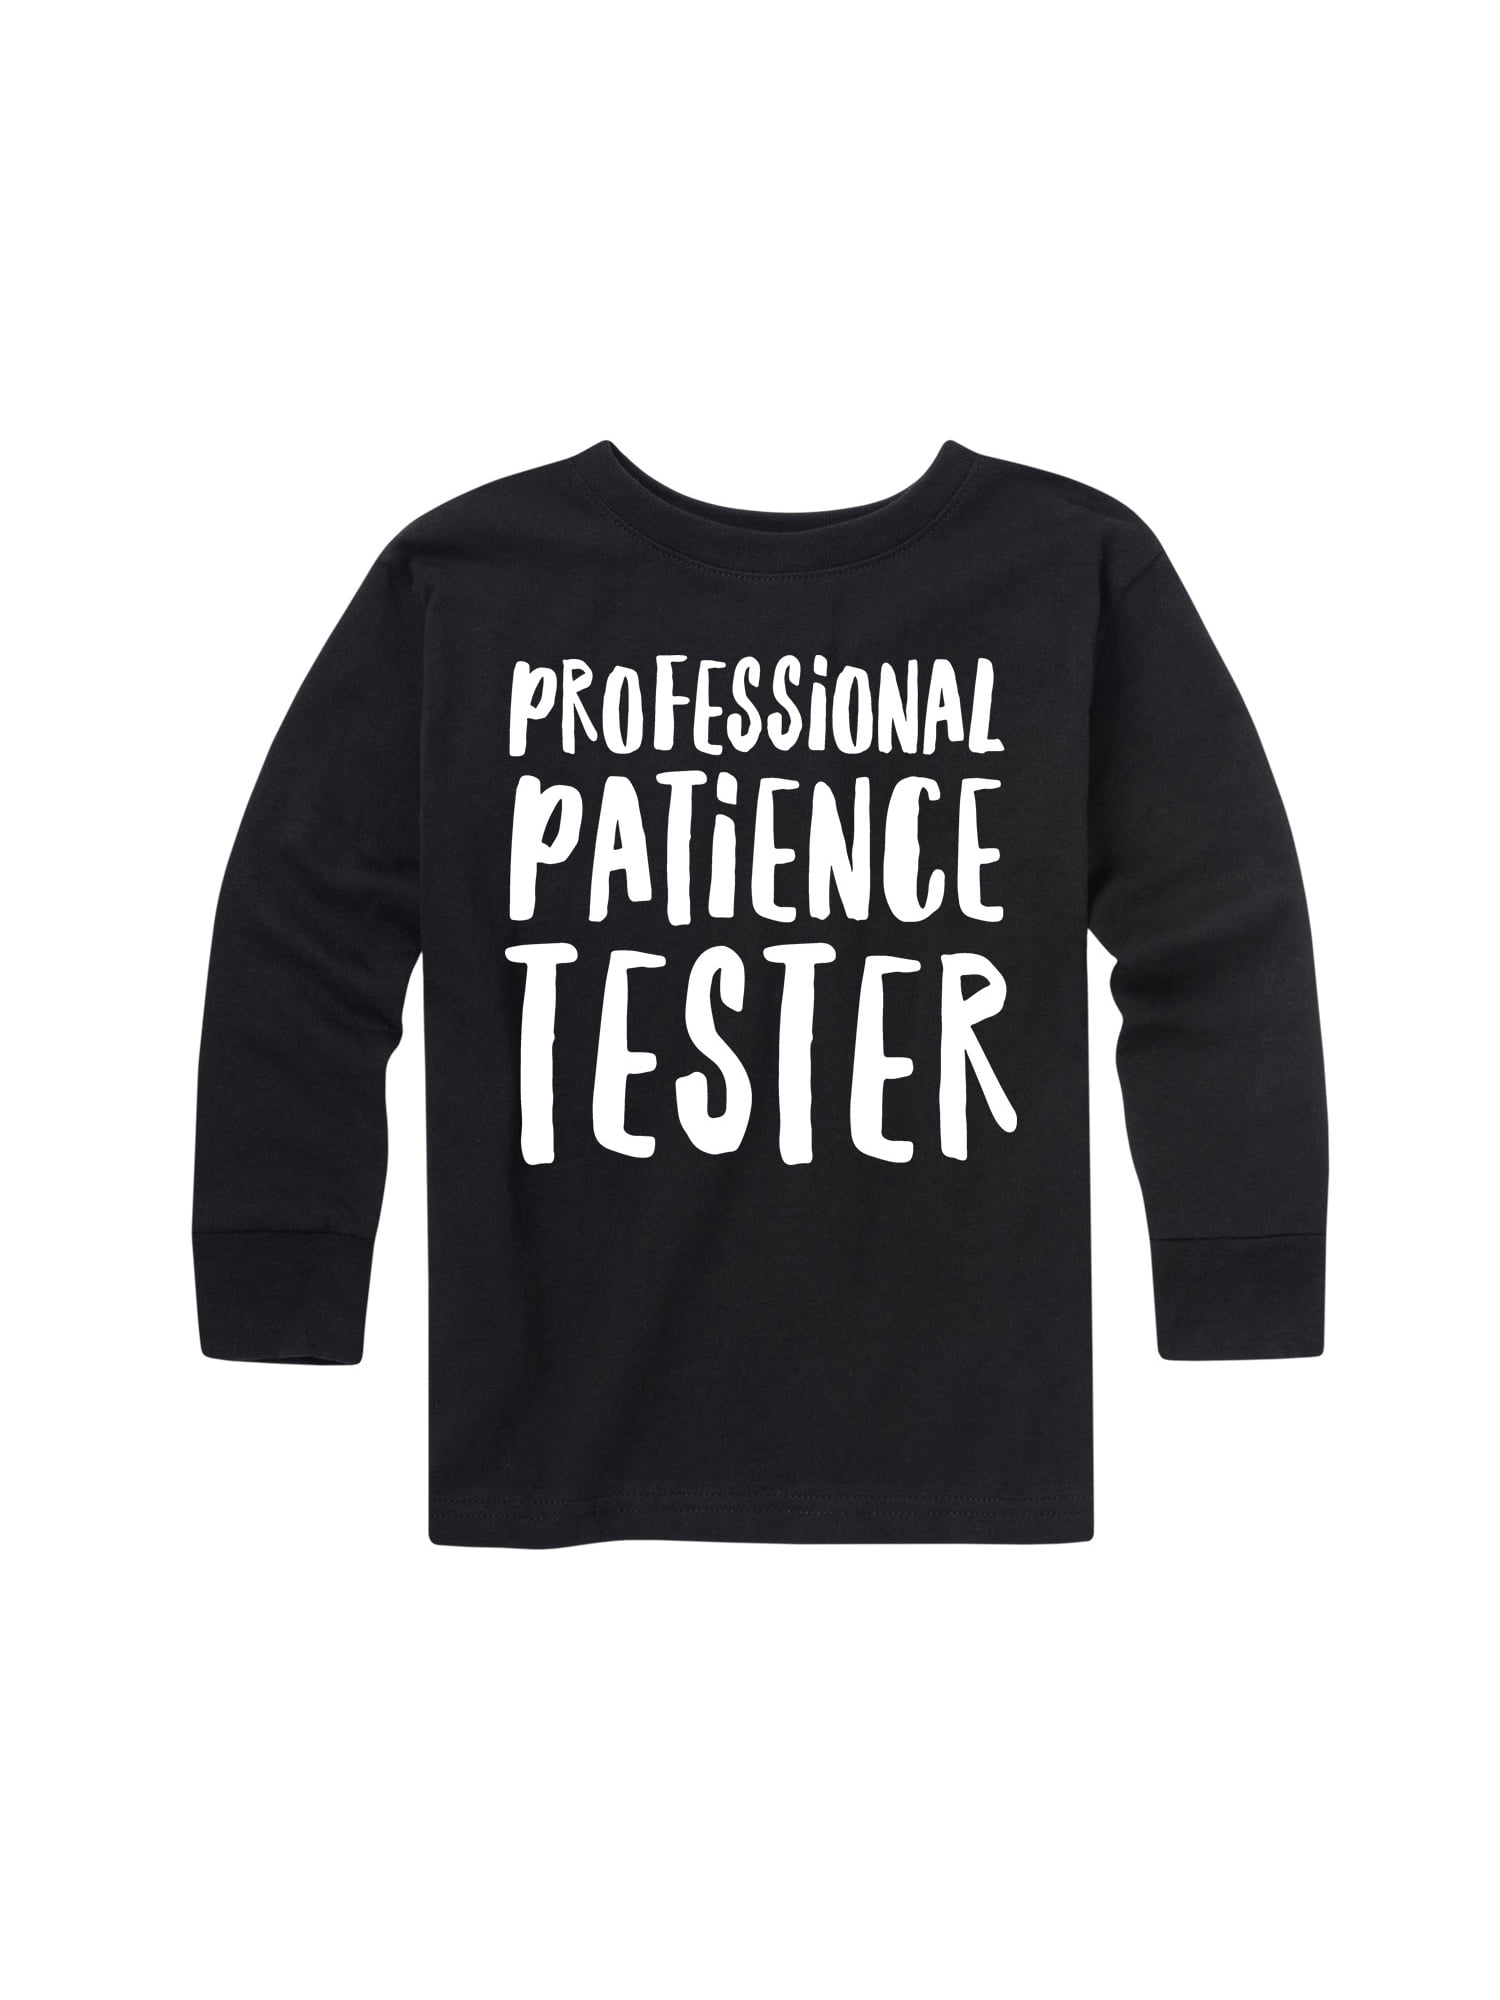 Professional Patience Tester Tshirt Funny Boys Tshirt Gift For Girls Tee Clothes